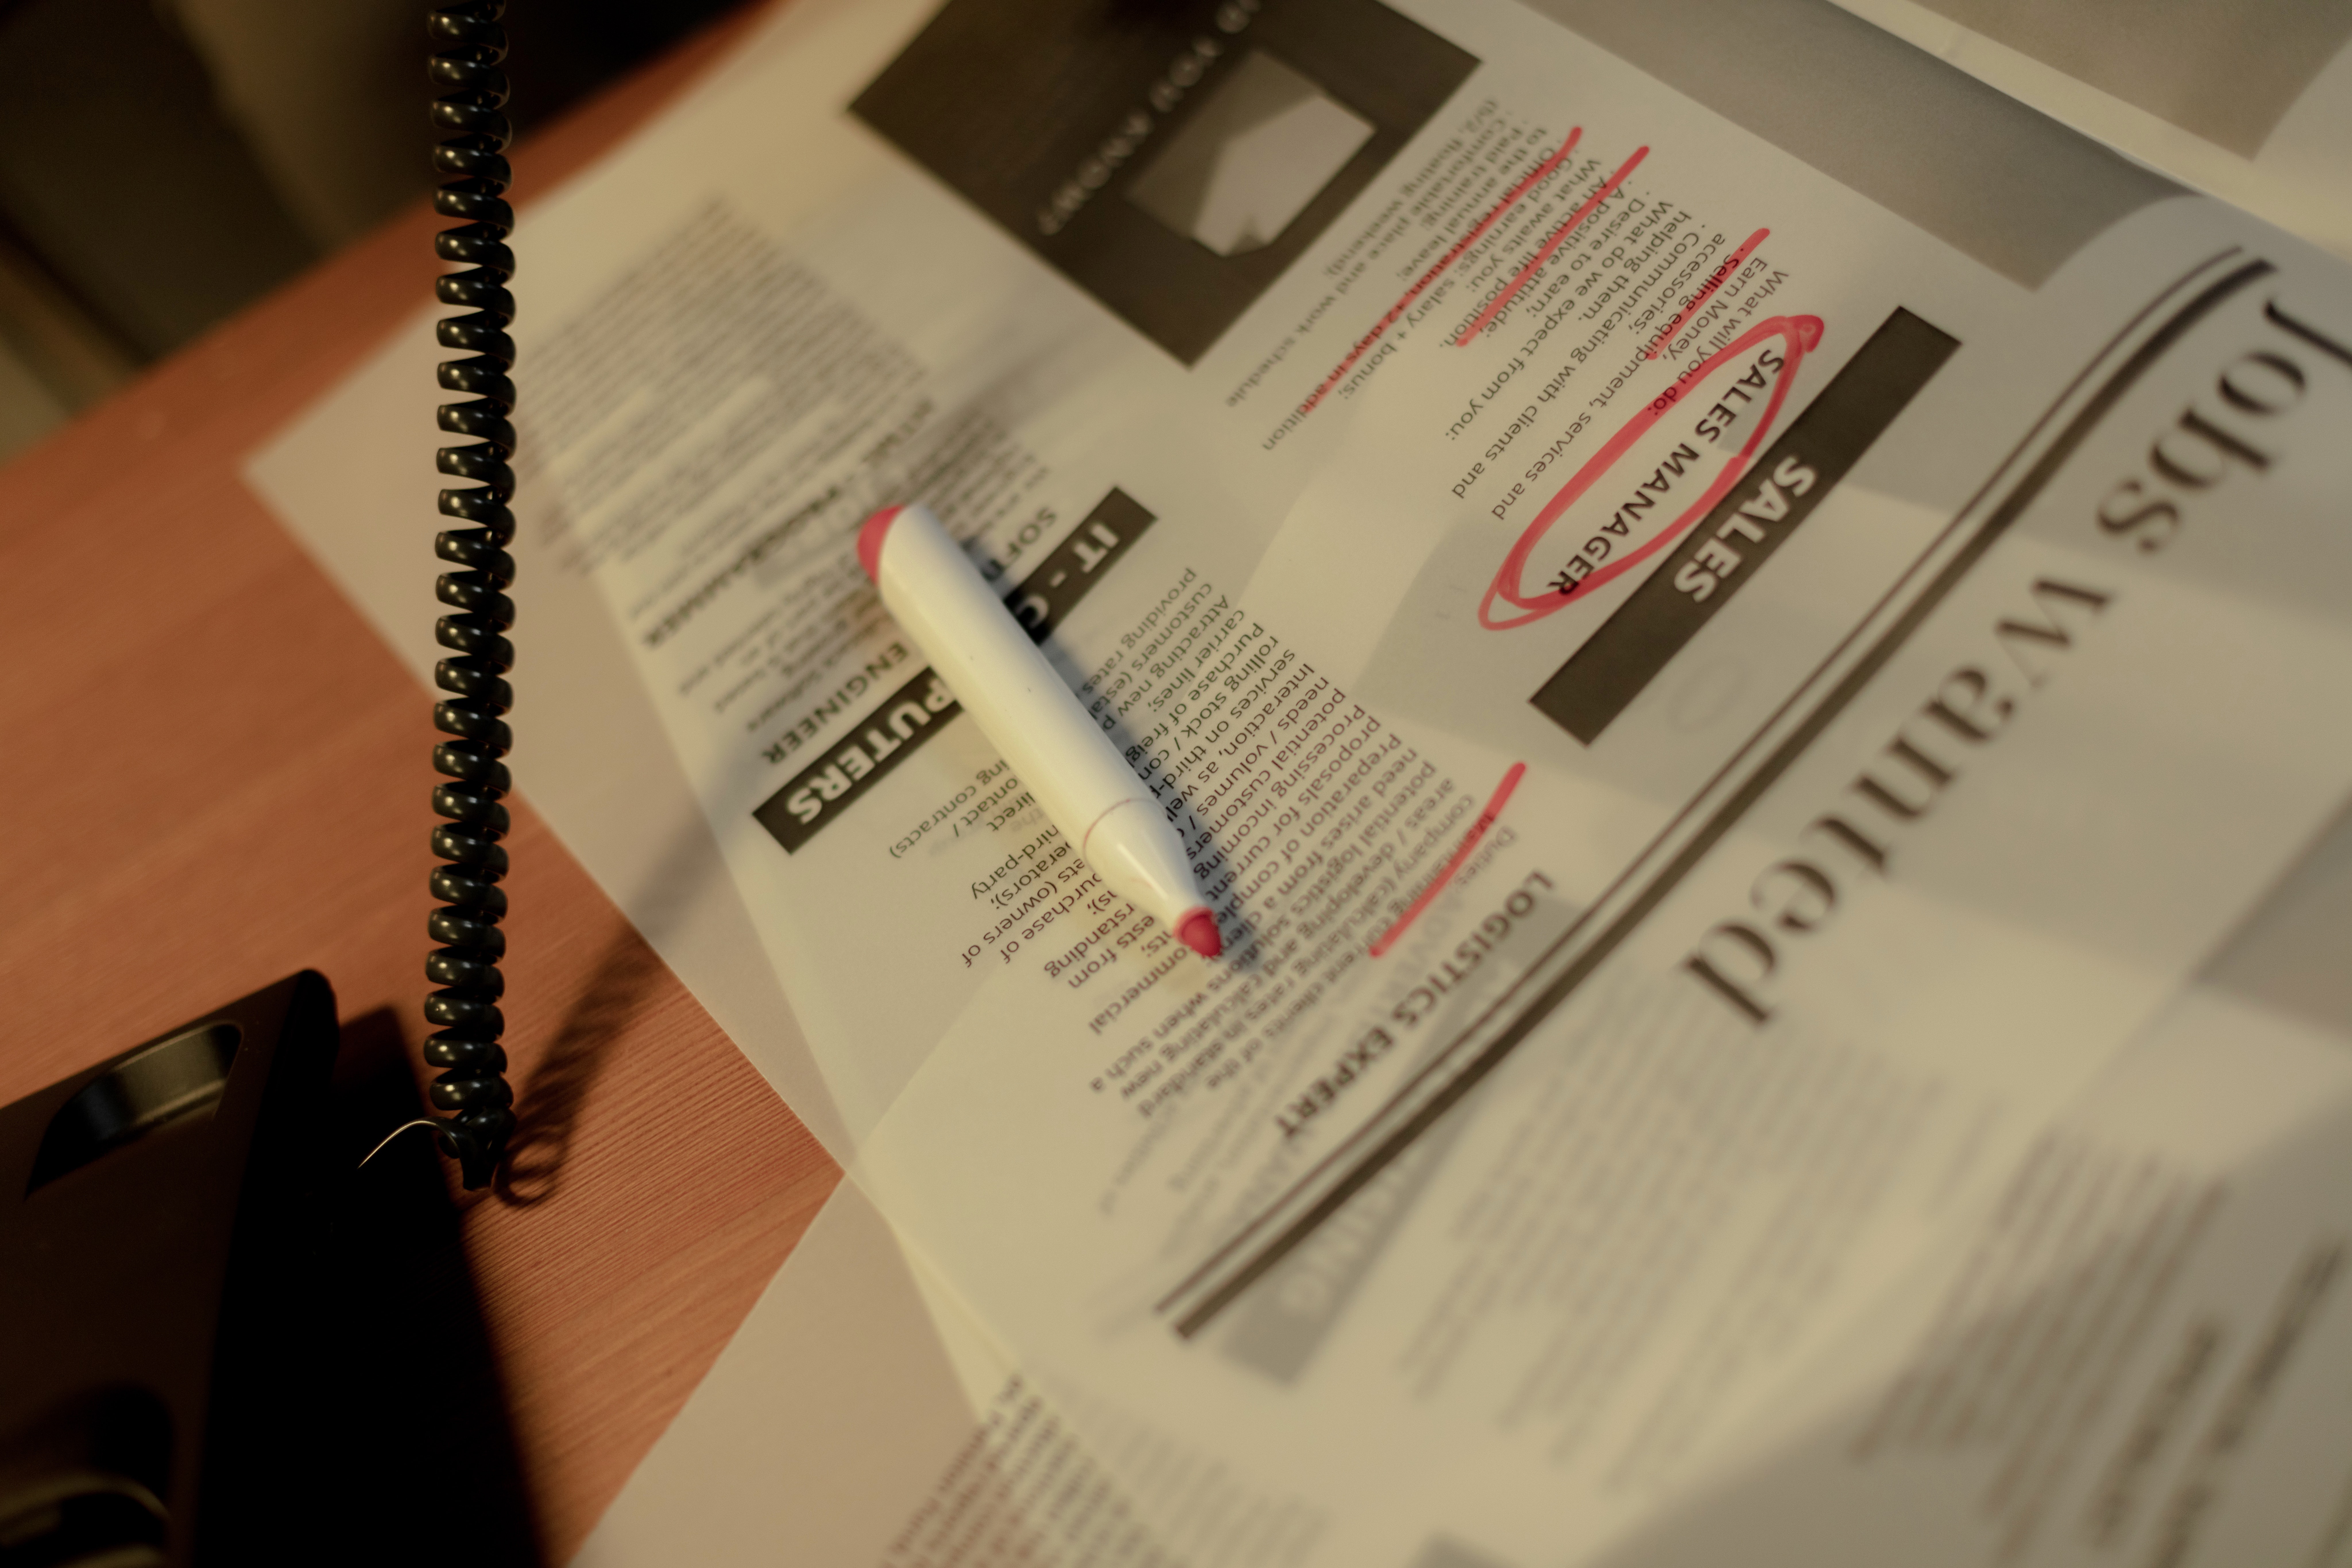 A newspaper and a red marker lie on a table. The jobs section of the newspaper is shown and the role of a sales manager is circled in red.